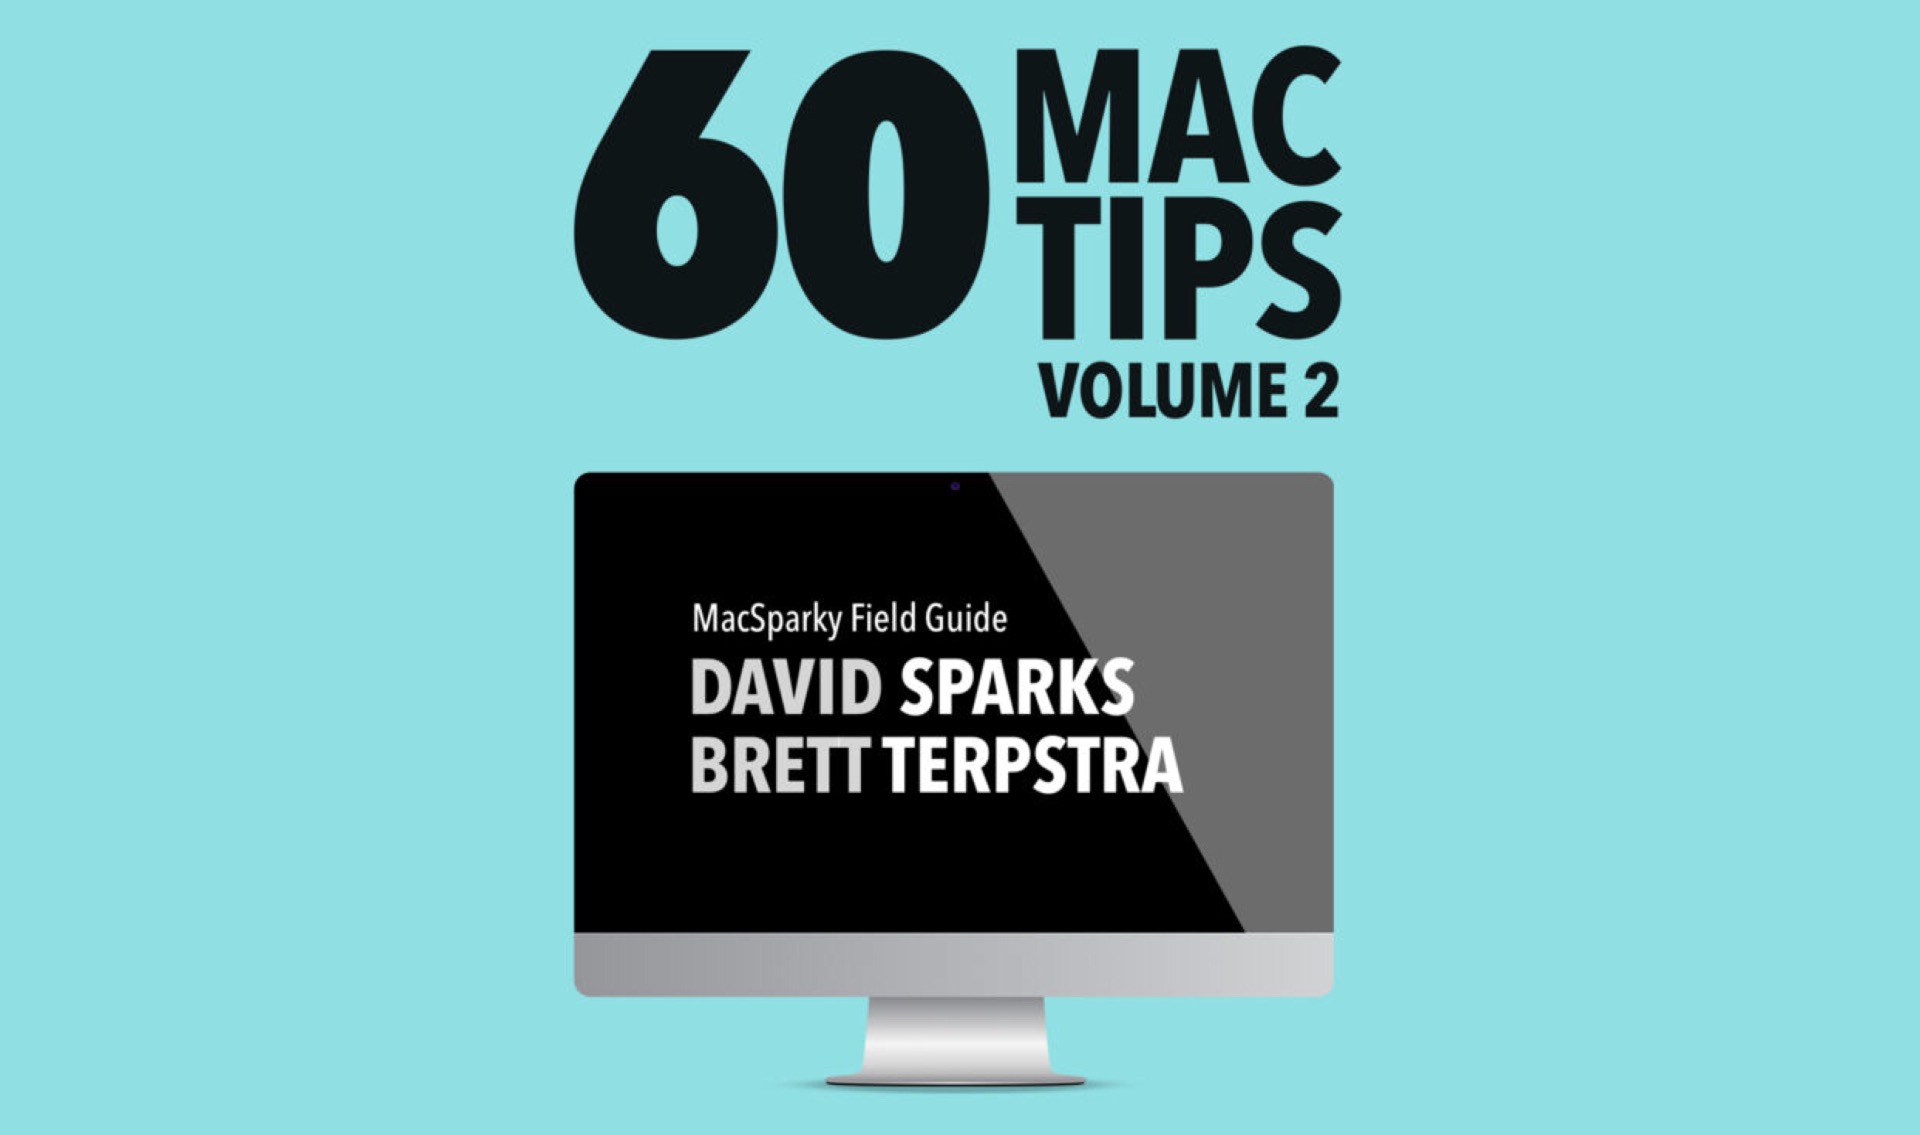 60-mac-tips-volume-2-by-david-sparks-and-brett-terpstra